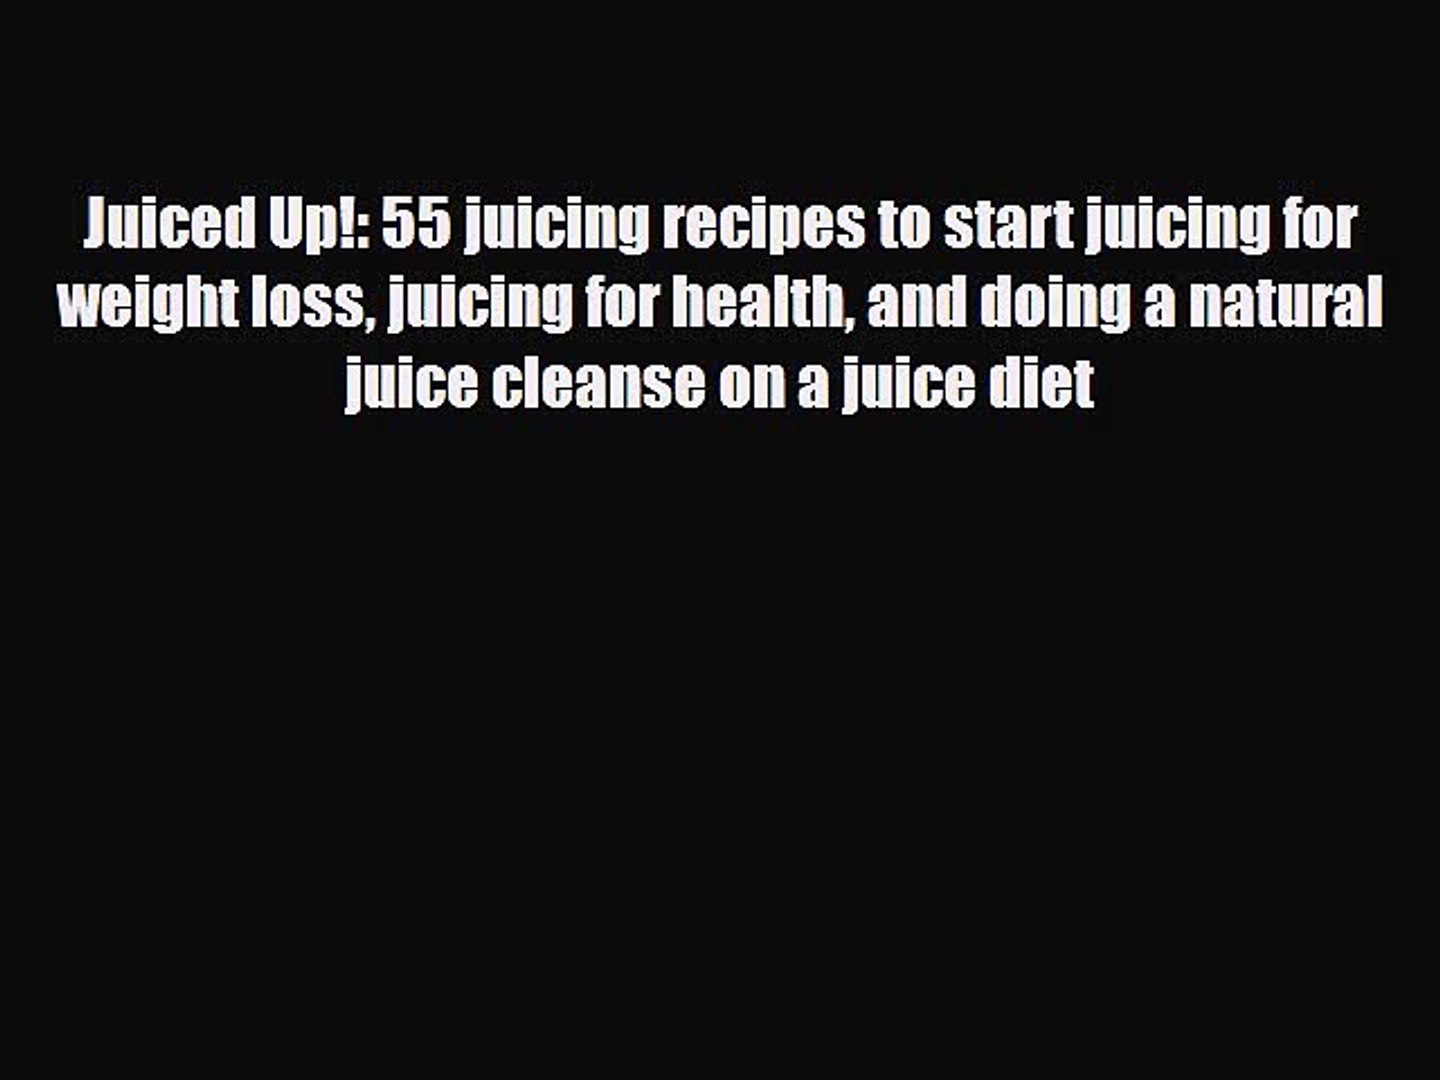 ⁣Read ‪Juiced Up!: 55 juicing recipes to start juicing for weight loss juicing for health and